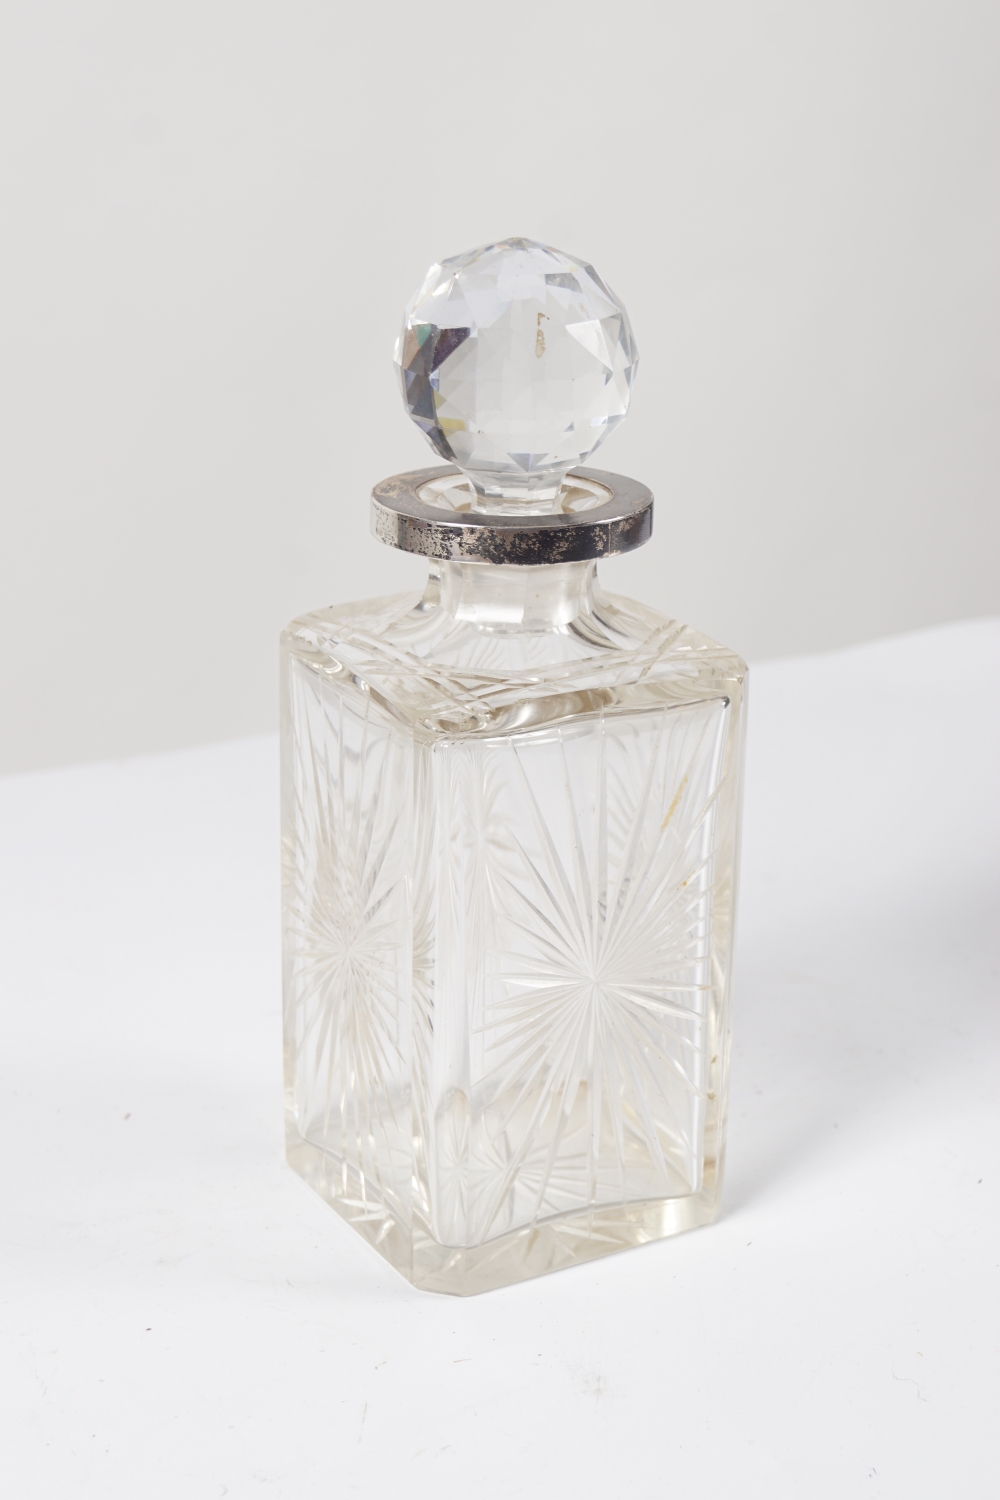 SILVER MOUNTED CRYSTAL DECANTER - Image 3 of 3